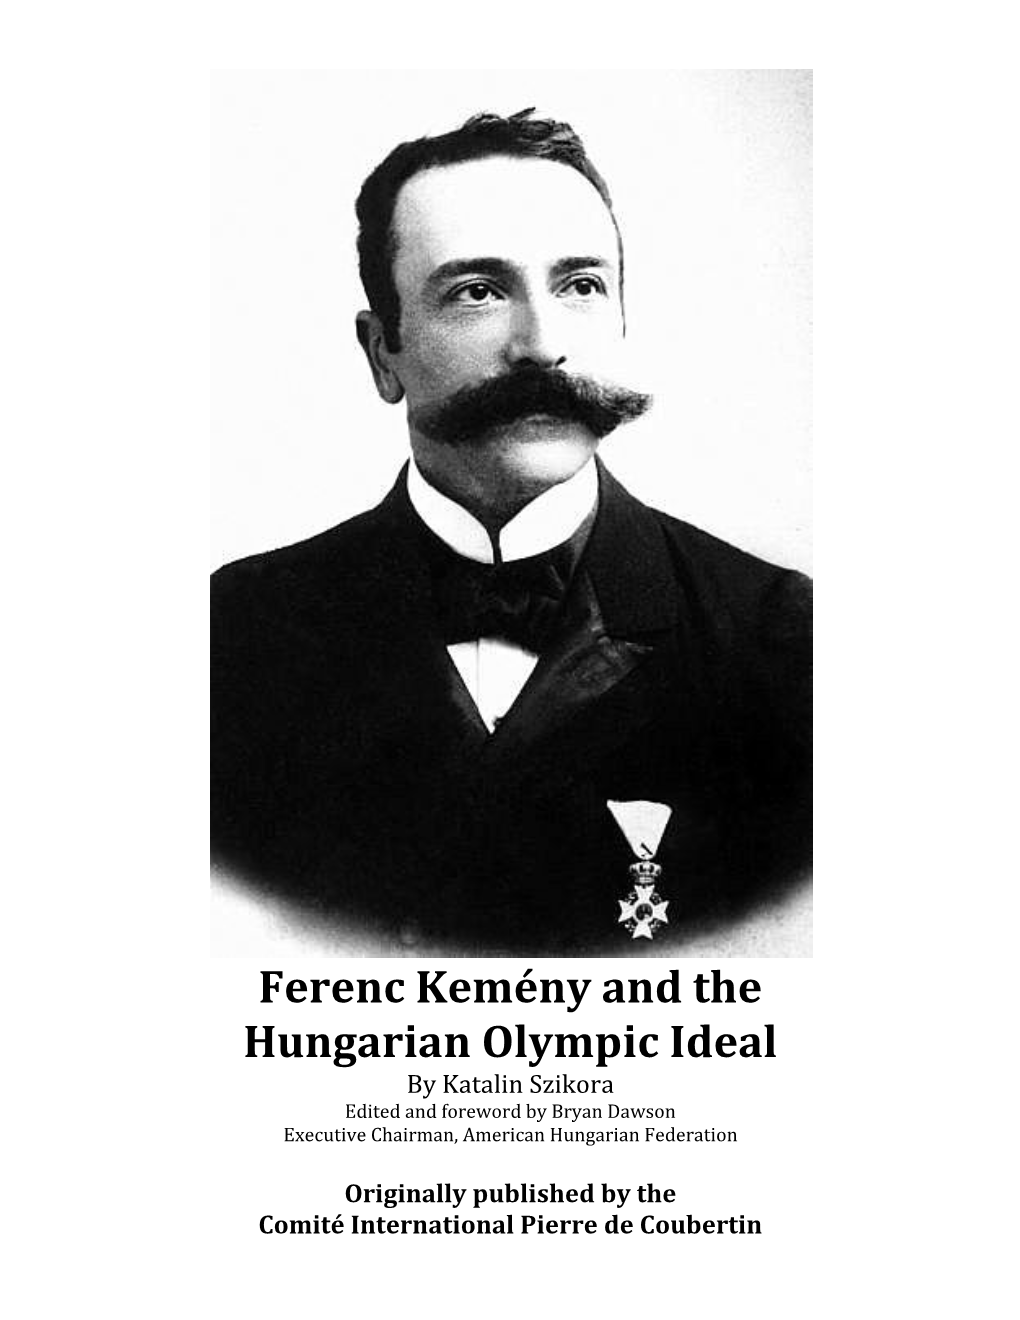 Ferenc Kemény and the Hungarian Olympic Ideal by Katalin Szikora, Edited by Bryan Dawson Page 1